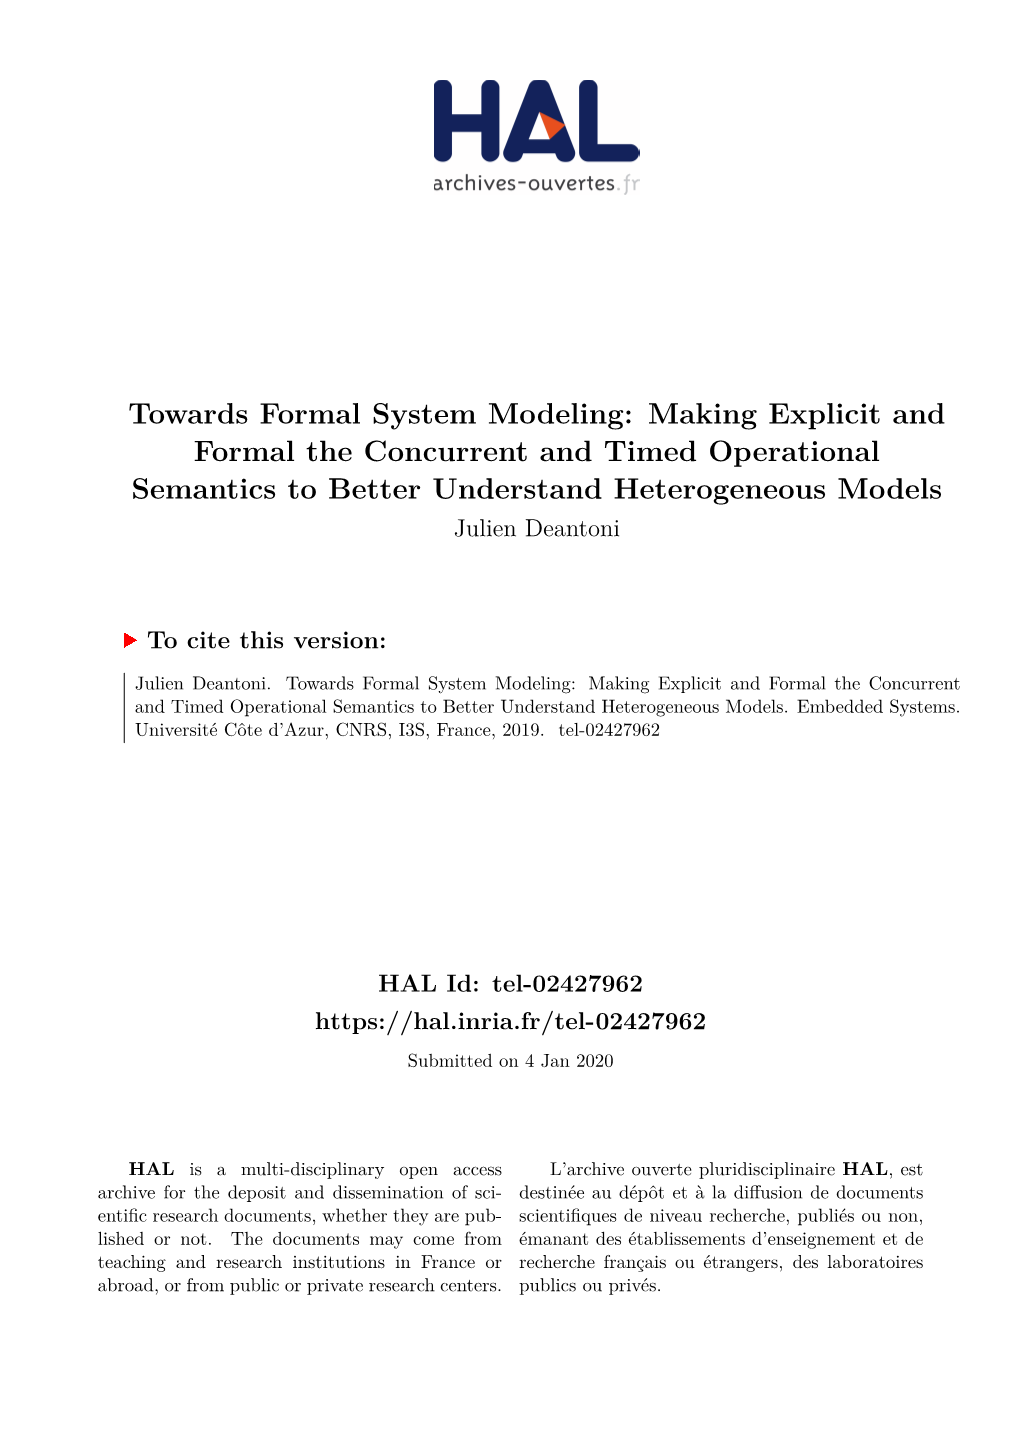 Towards Formal System Modeling: Making Explicit and Formal the Concurrent and Timed Operational Semantics to Better Understand Heterogeneous Models Julien Deantoni